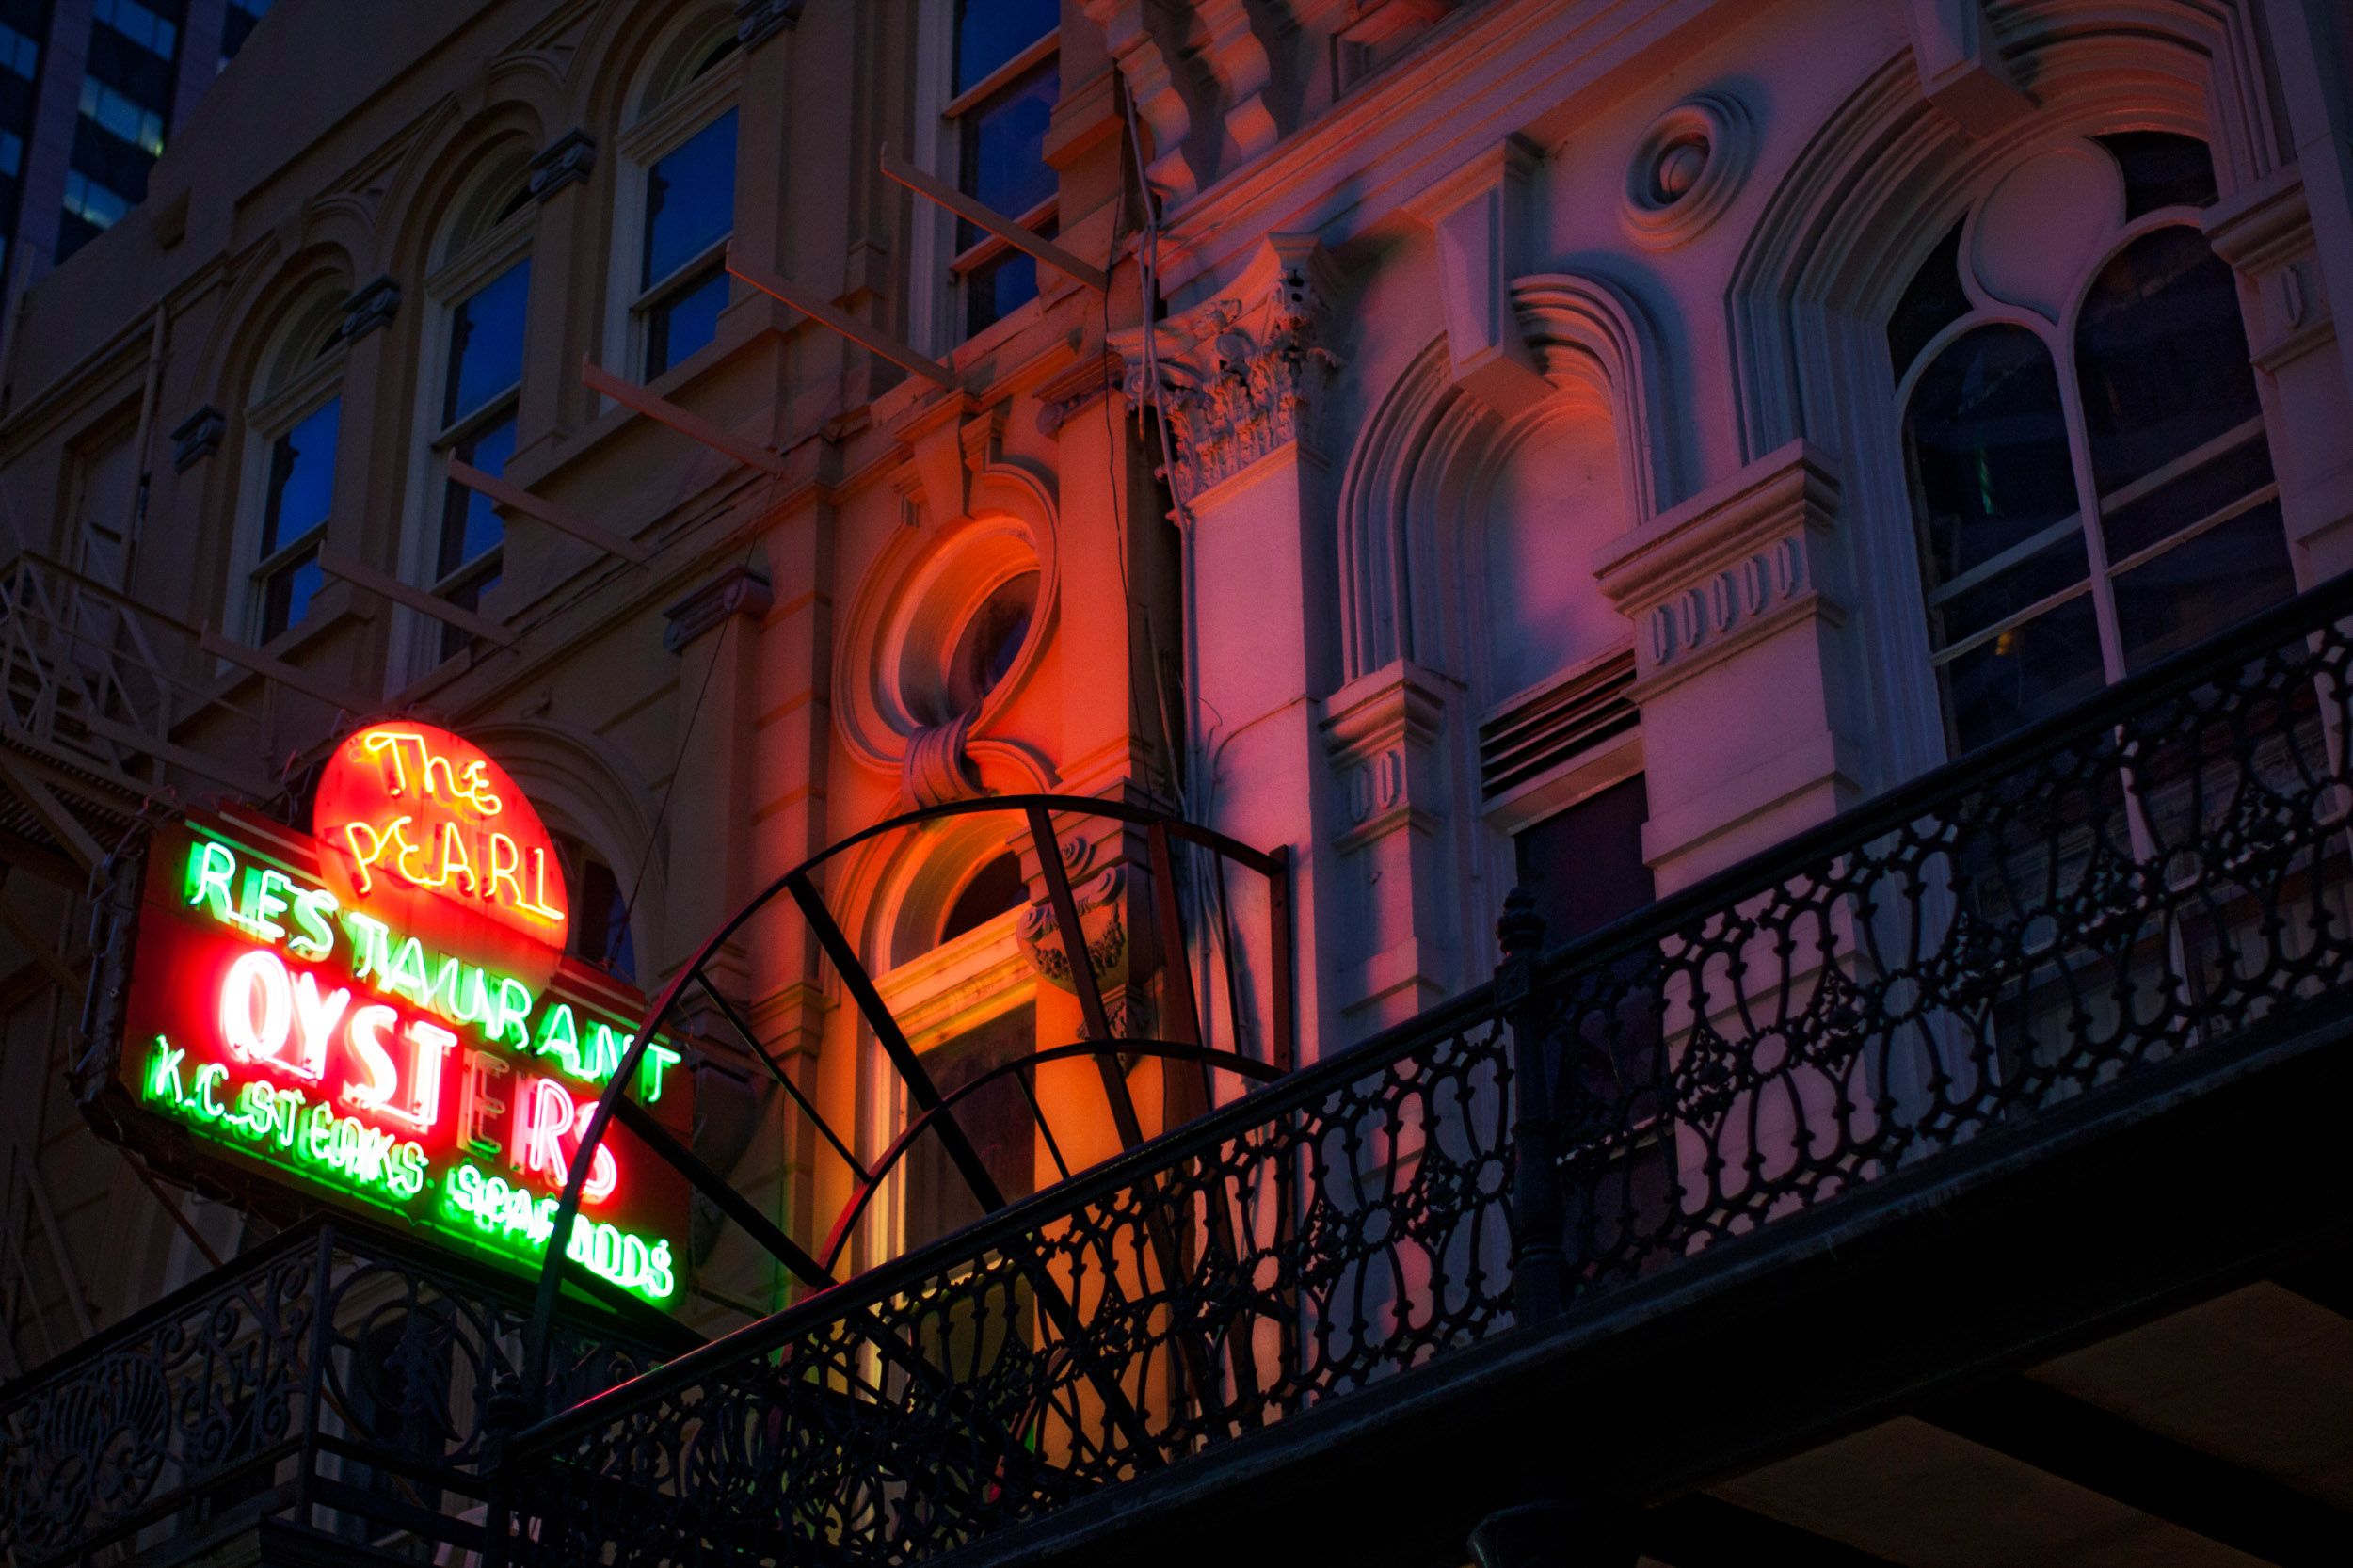 The neon beckons in New Orleans’ CBD